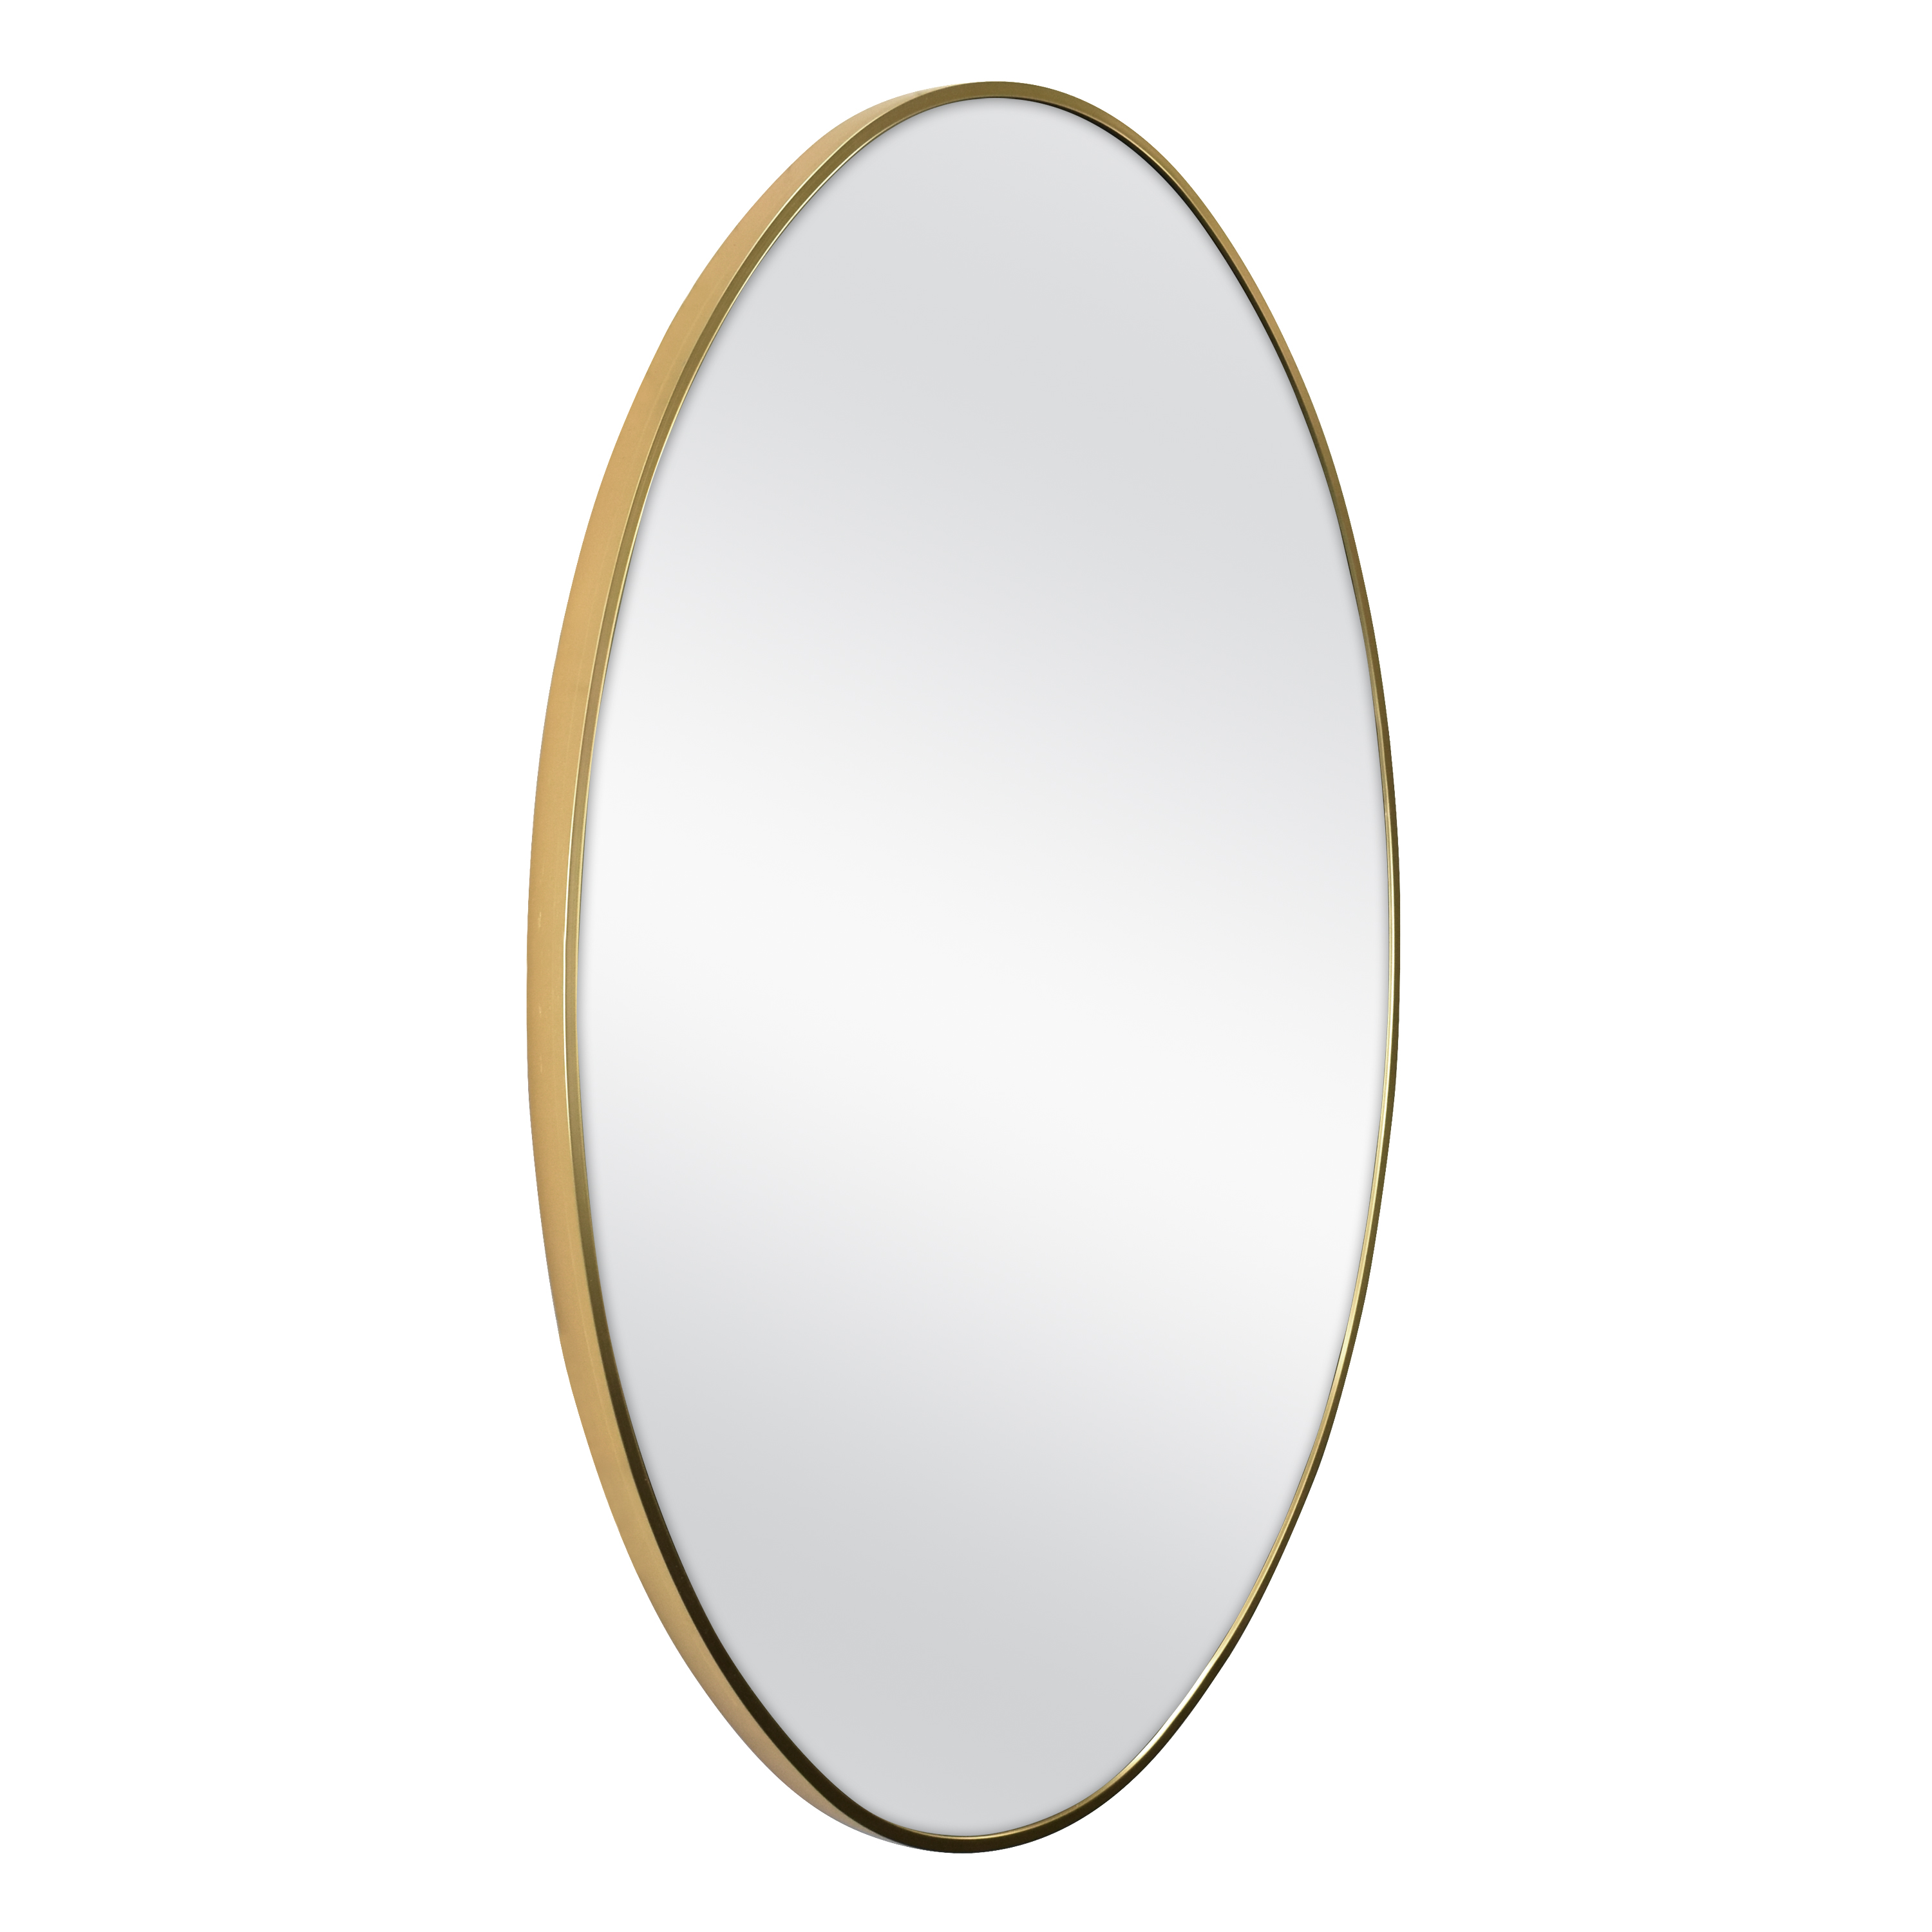 Oval Metal Wall Mirror by Drew Barrymore Flower Home - image 3 of 6